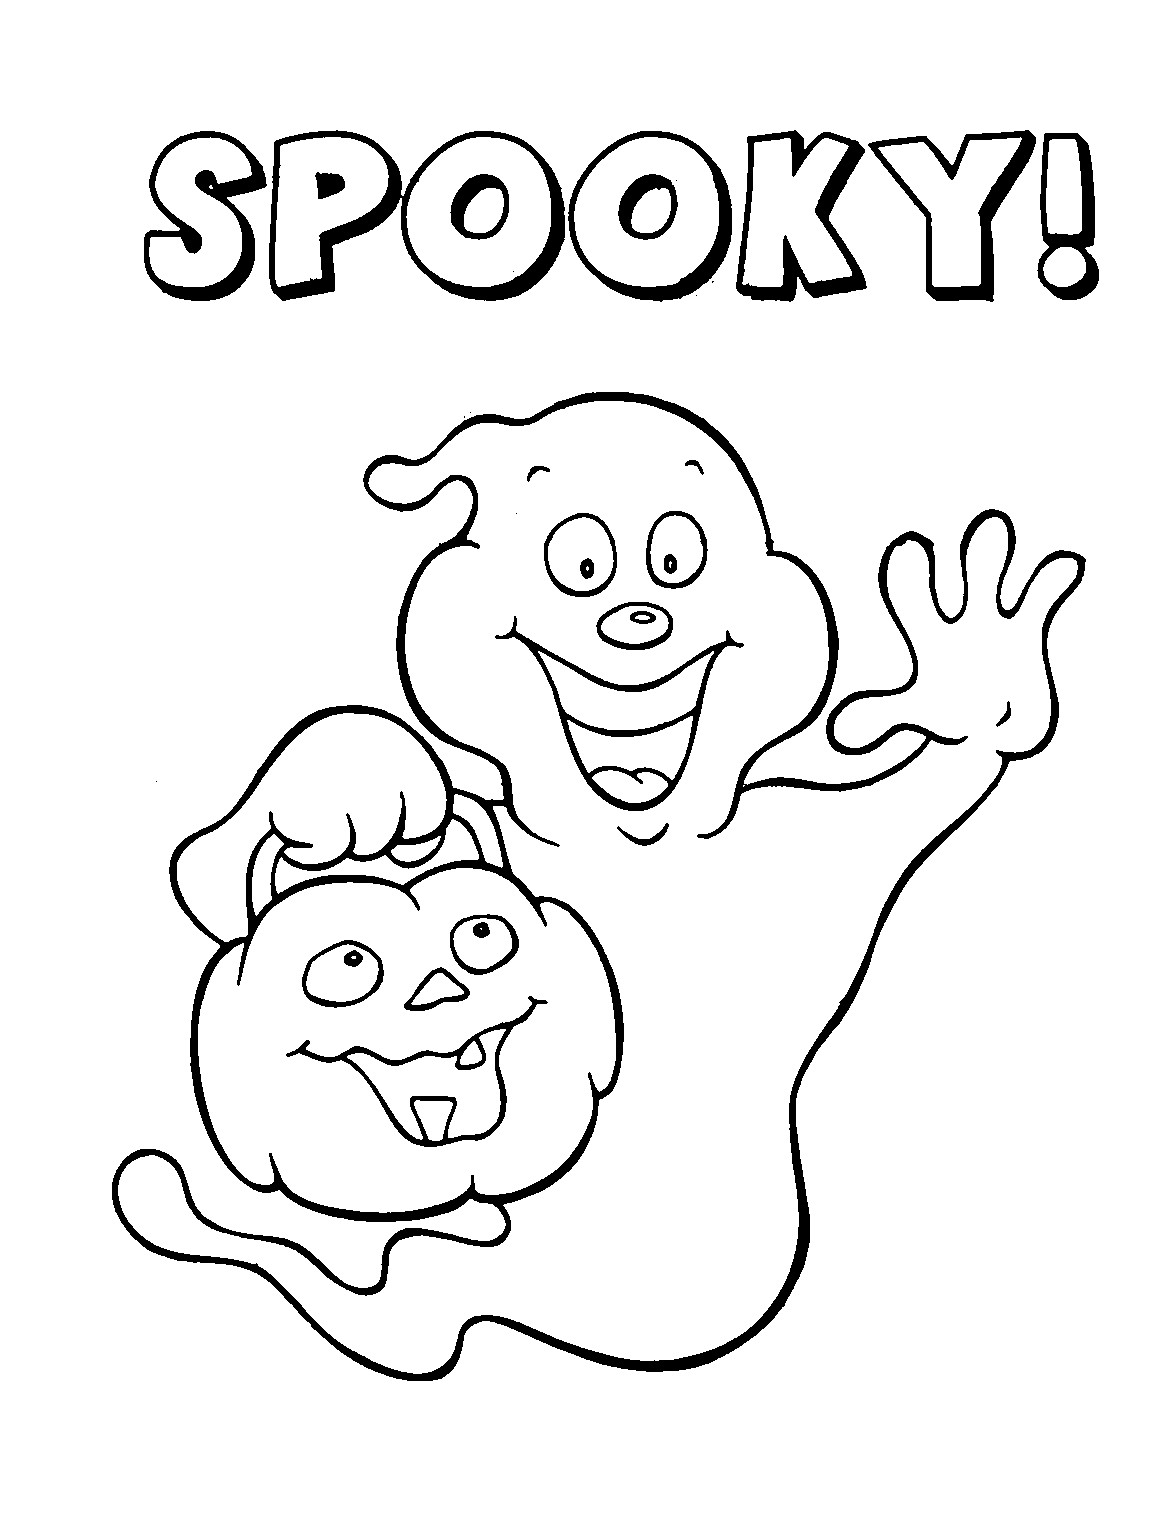 Halloween Coloring Books For Kids
 50 Free Printable Halloween Coloring Pages For Kids